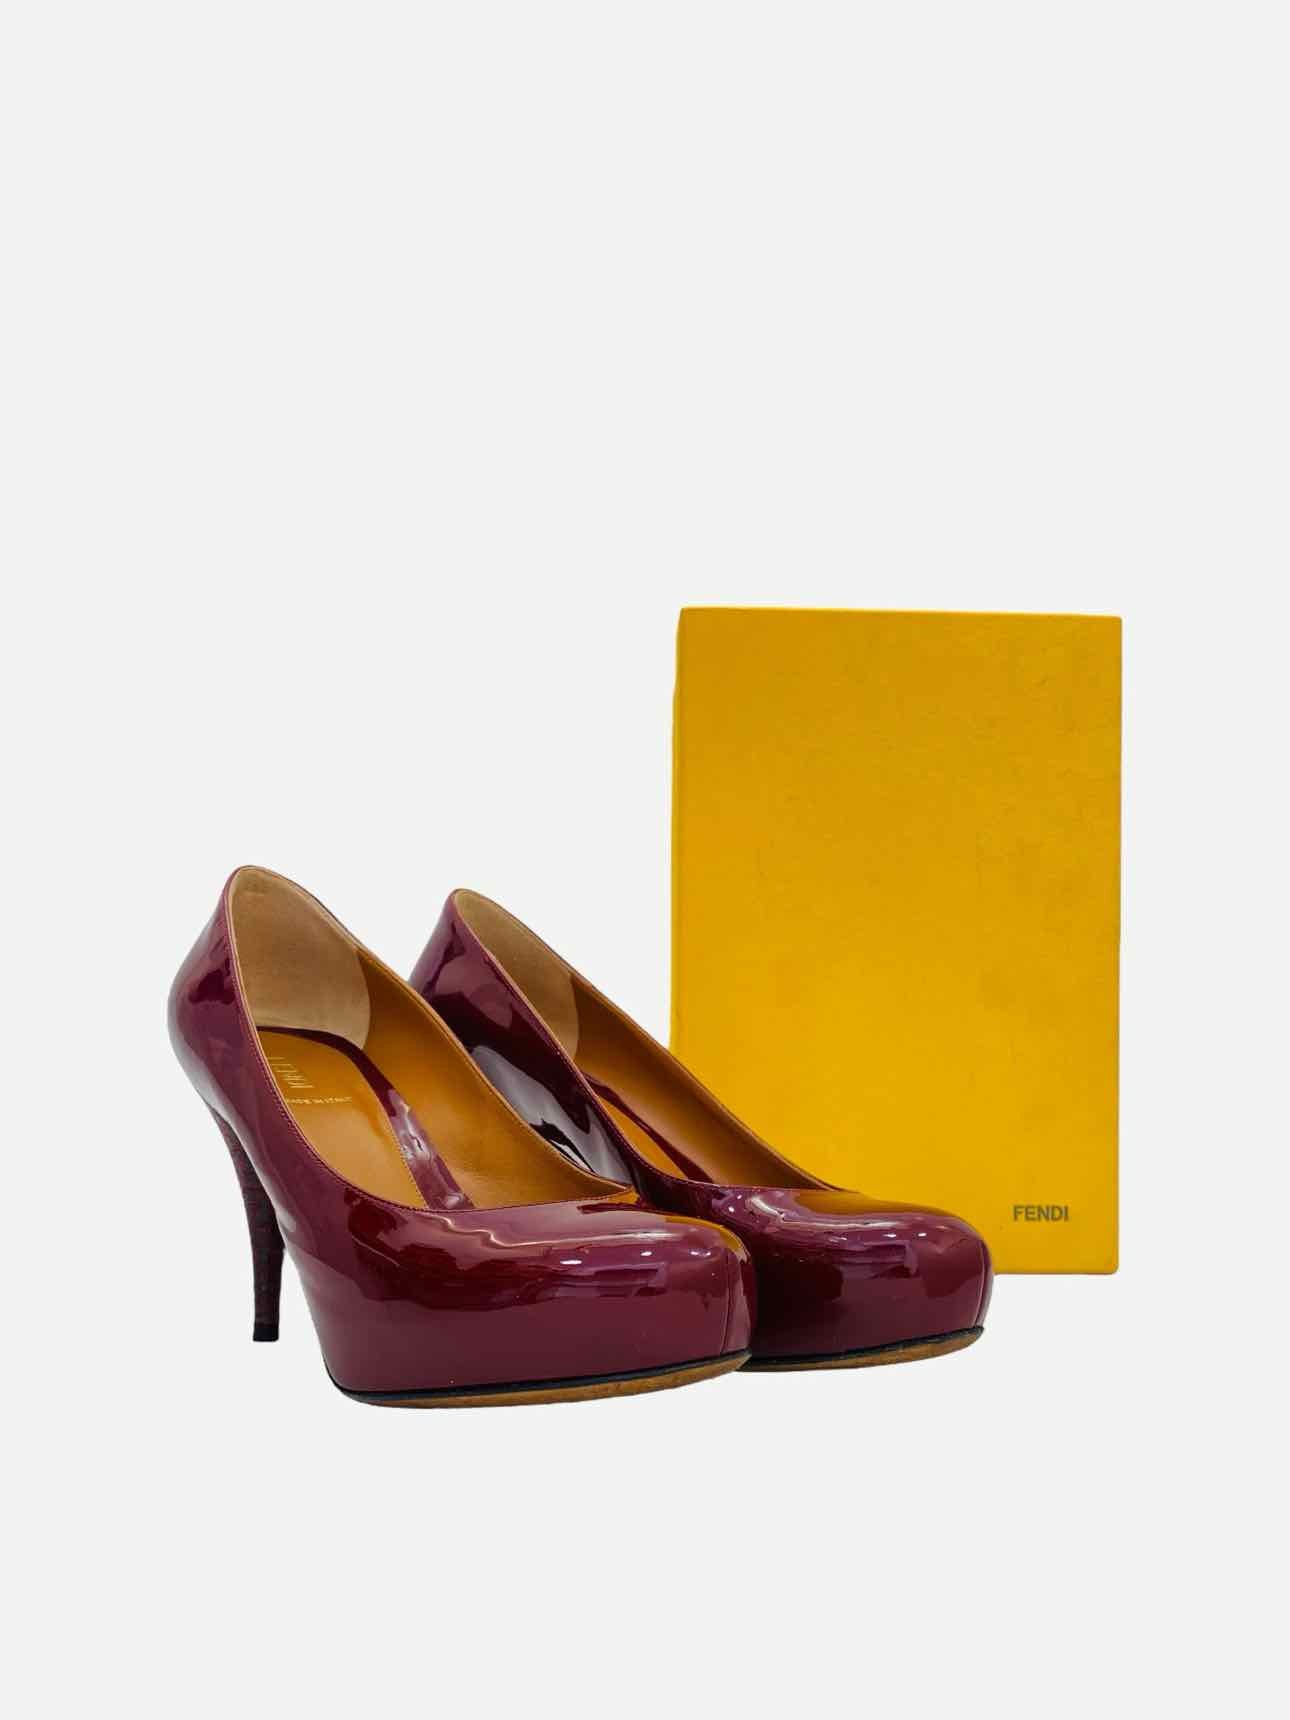 Pre-loved FENDI Ruby Red FF Motif Pumps from Reems Closet